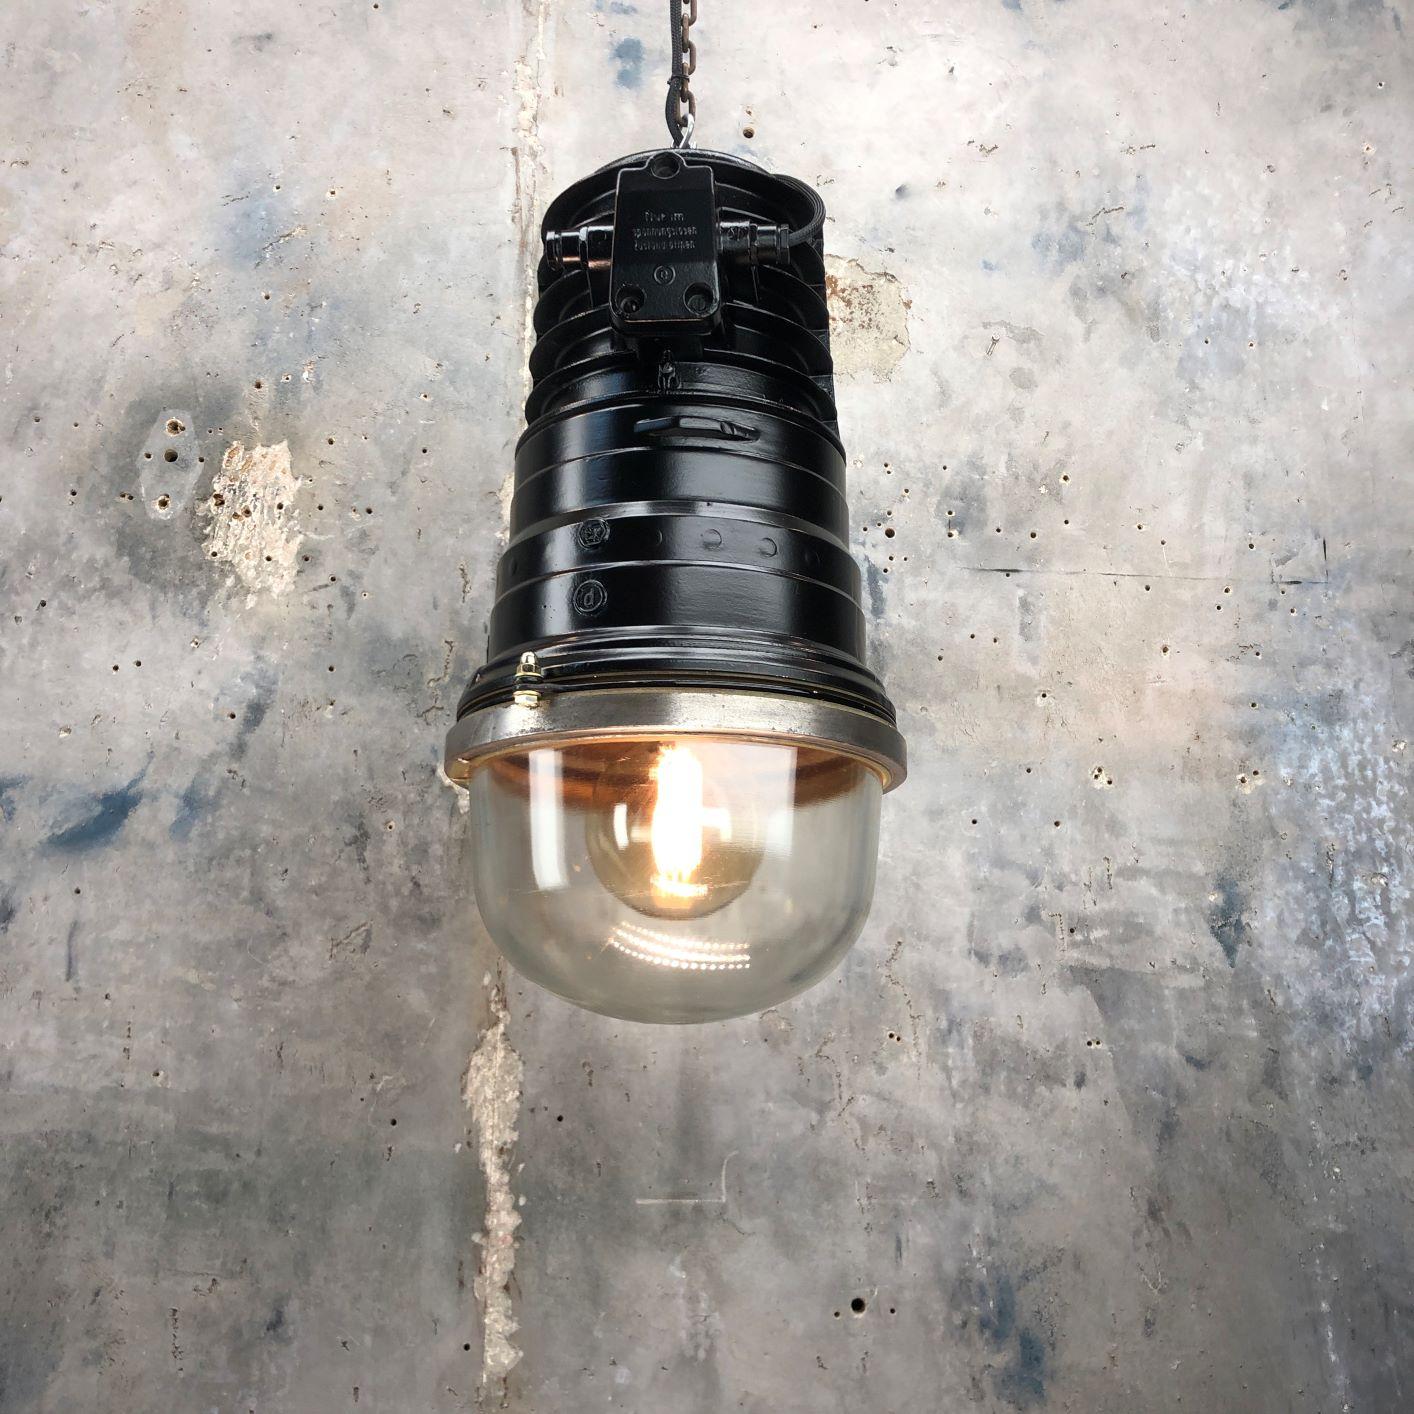 This is a listing for 3 units and shipping to Dubai.

A vintage industrial 18kg cast aluminium explosion proof ceiling pendant by EOW fitted with energy saving LED light bulb and painted satin black. 

Reclaimed and professionally restored by